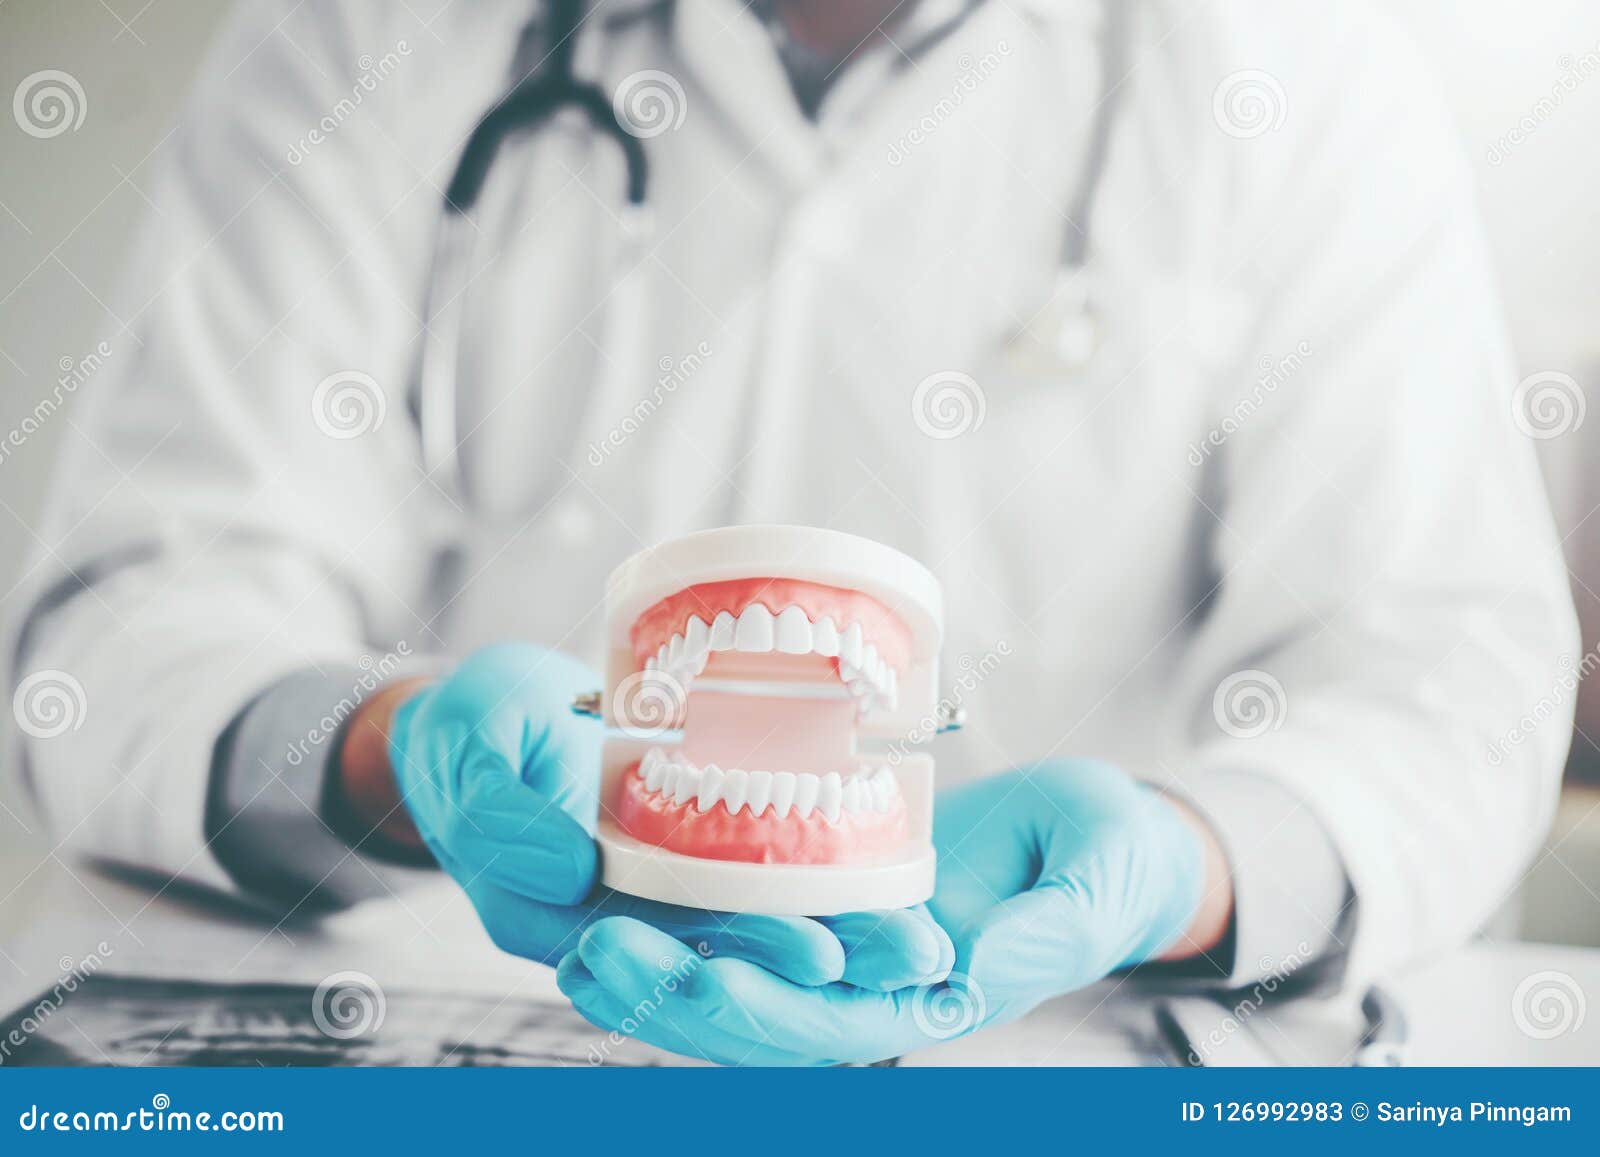 dentist holding a denture learning how to teeth at dentistÃâs of